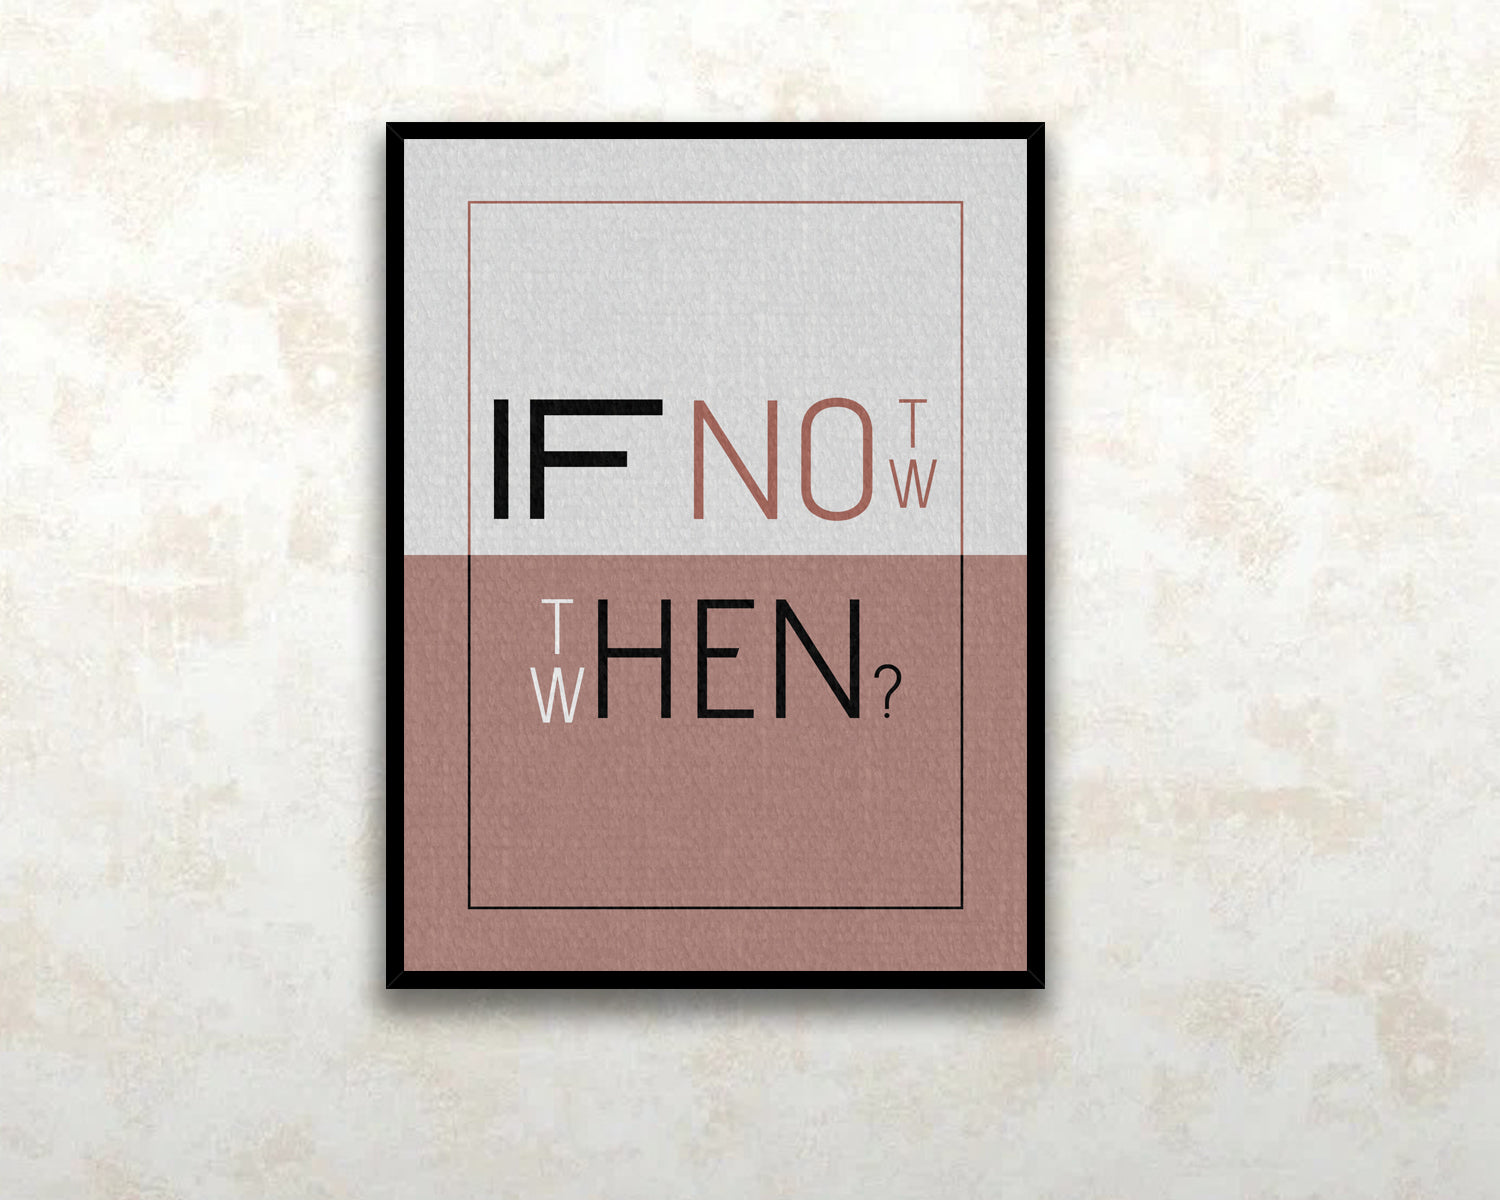 If no what then Canvas Wall Art 